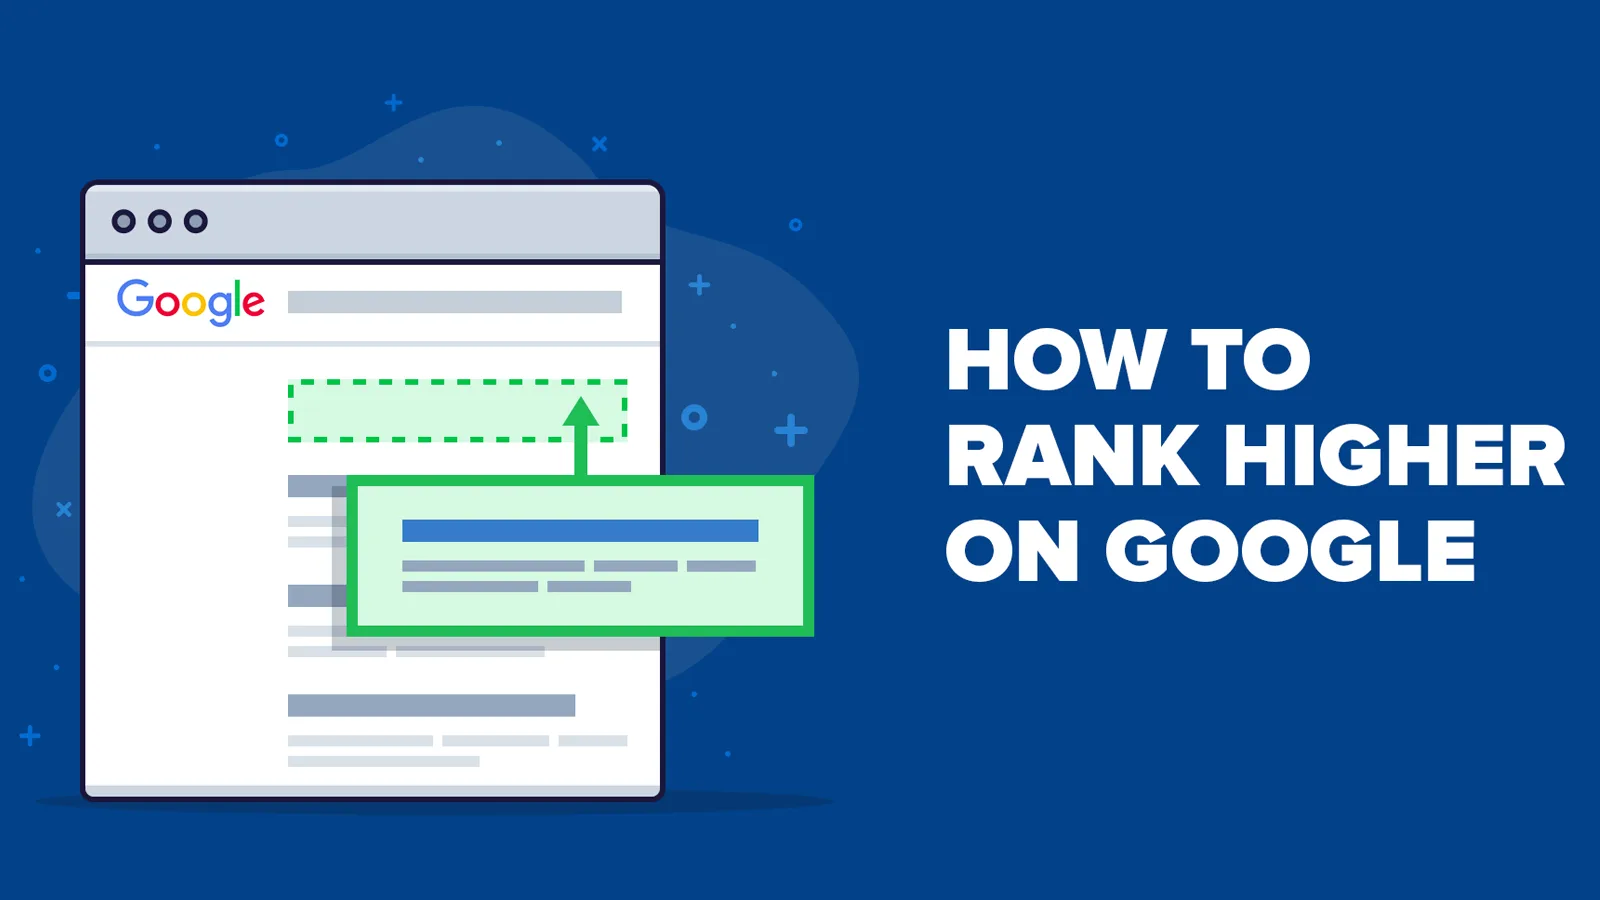 Steps to Rank Higher on Google